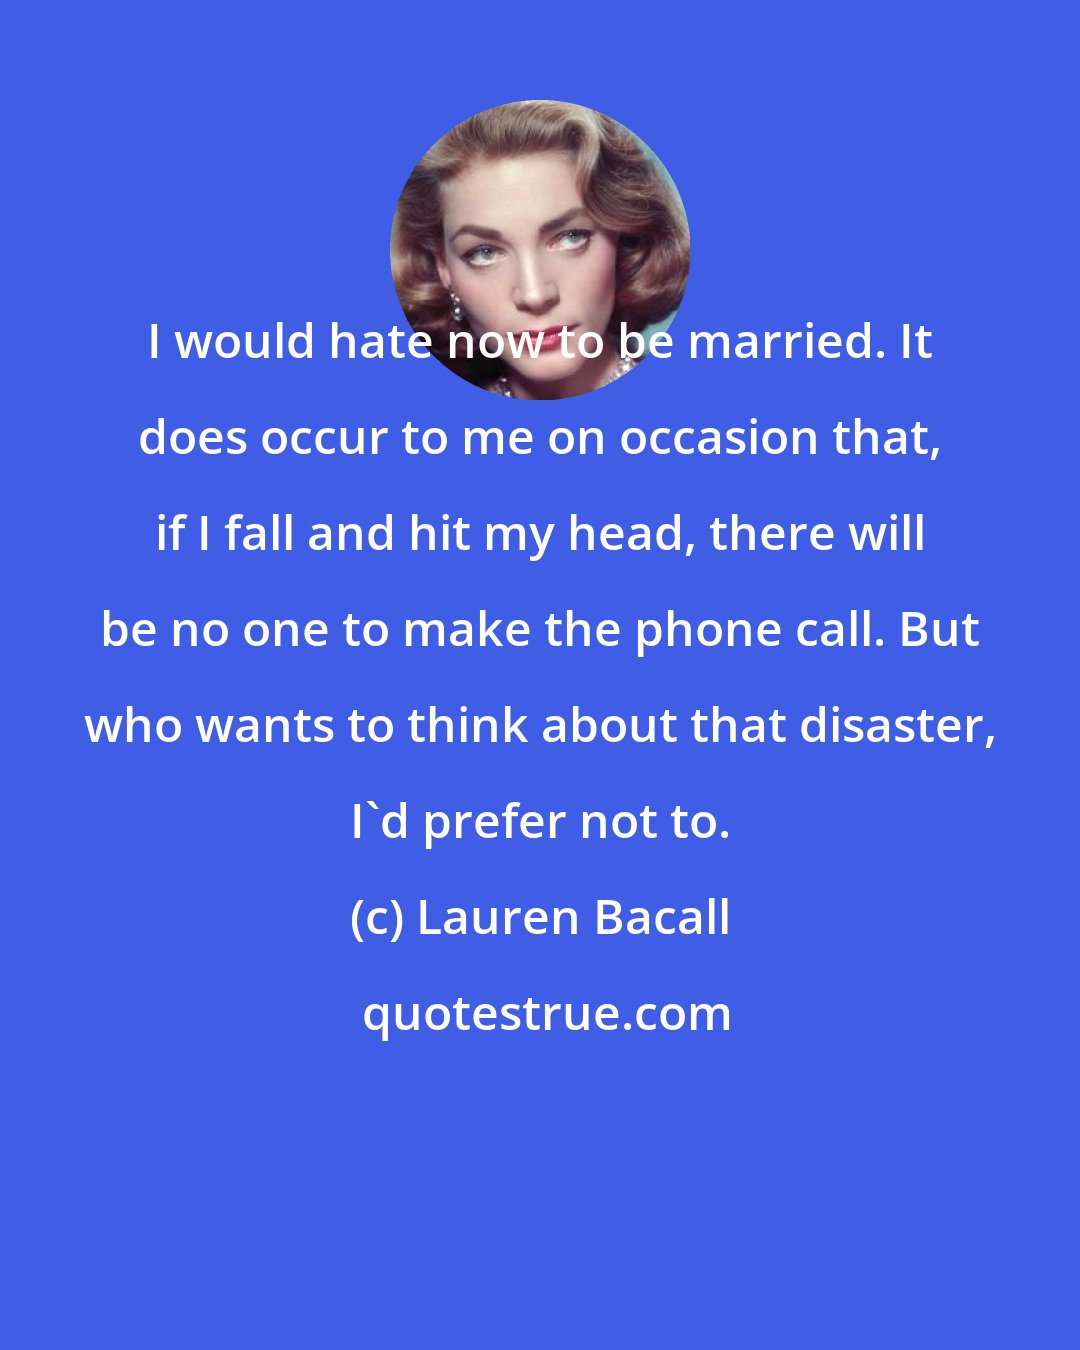 Lauren Bacall: I would hate now to be married. It does occur to me on occasion that, if I fall and hit my head, there will be no one to make the phone call. But who wants to think about that disaster, I'd prefer not to.